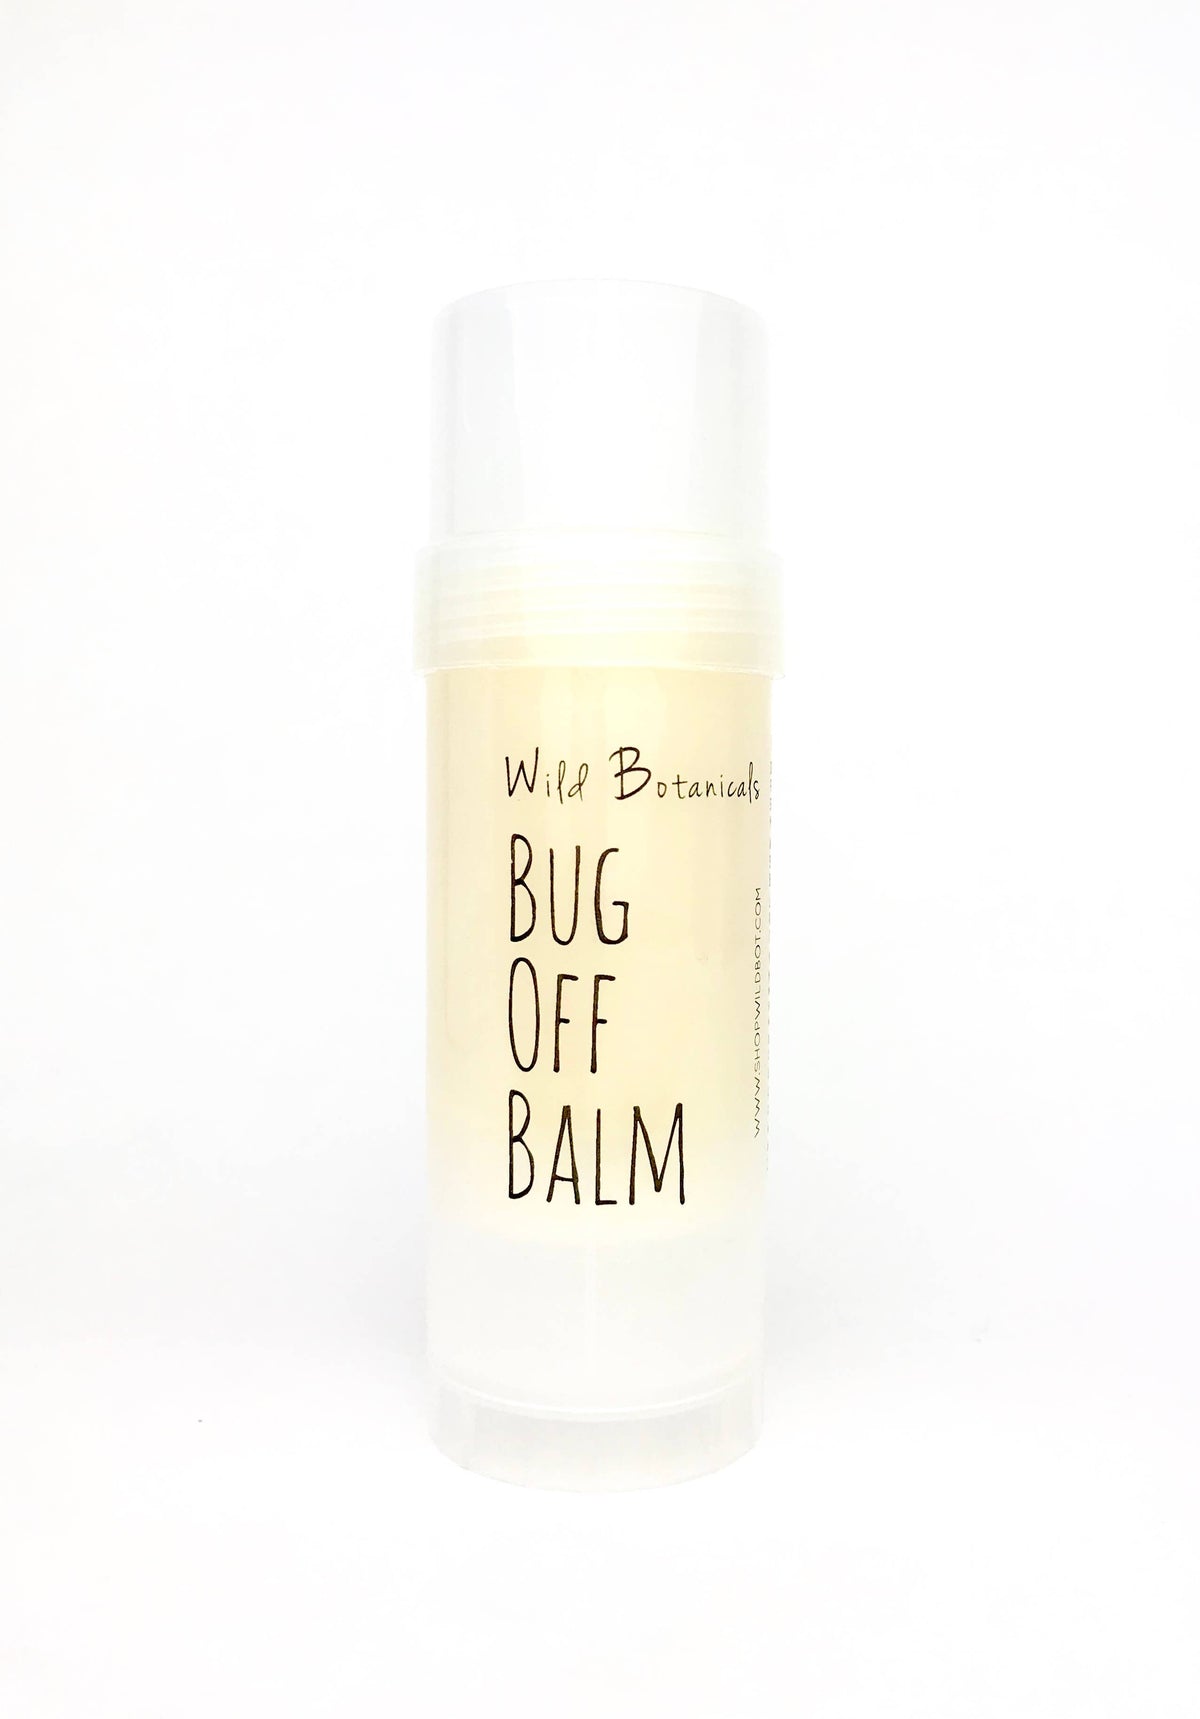 A transparent container of "Wild Botanicals - 2oz Bug Off Balm" against a plain white background. The balm appears as a yellowish substance in a twist-up tube.